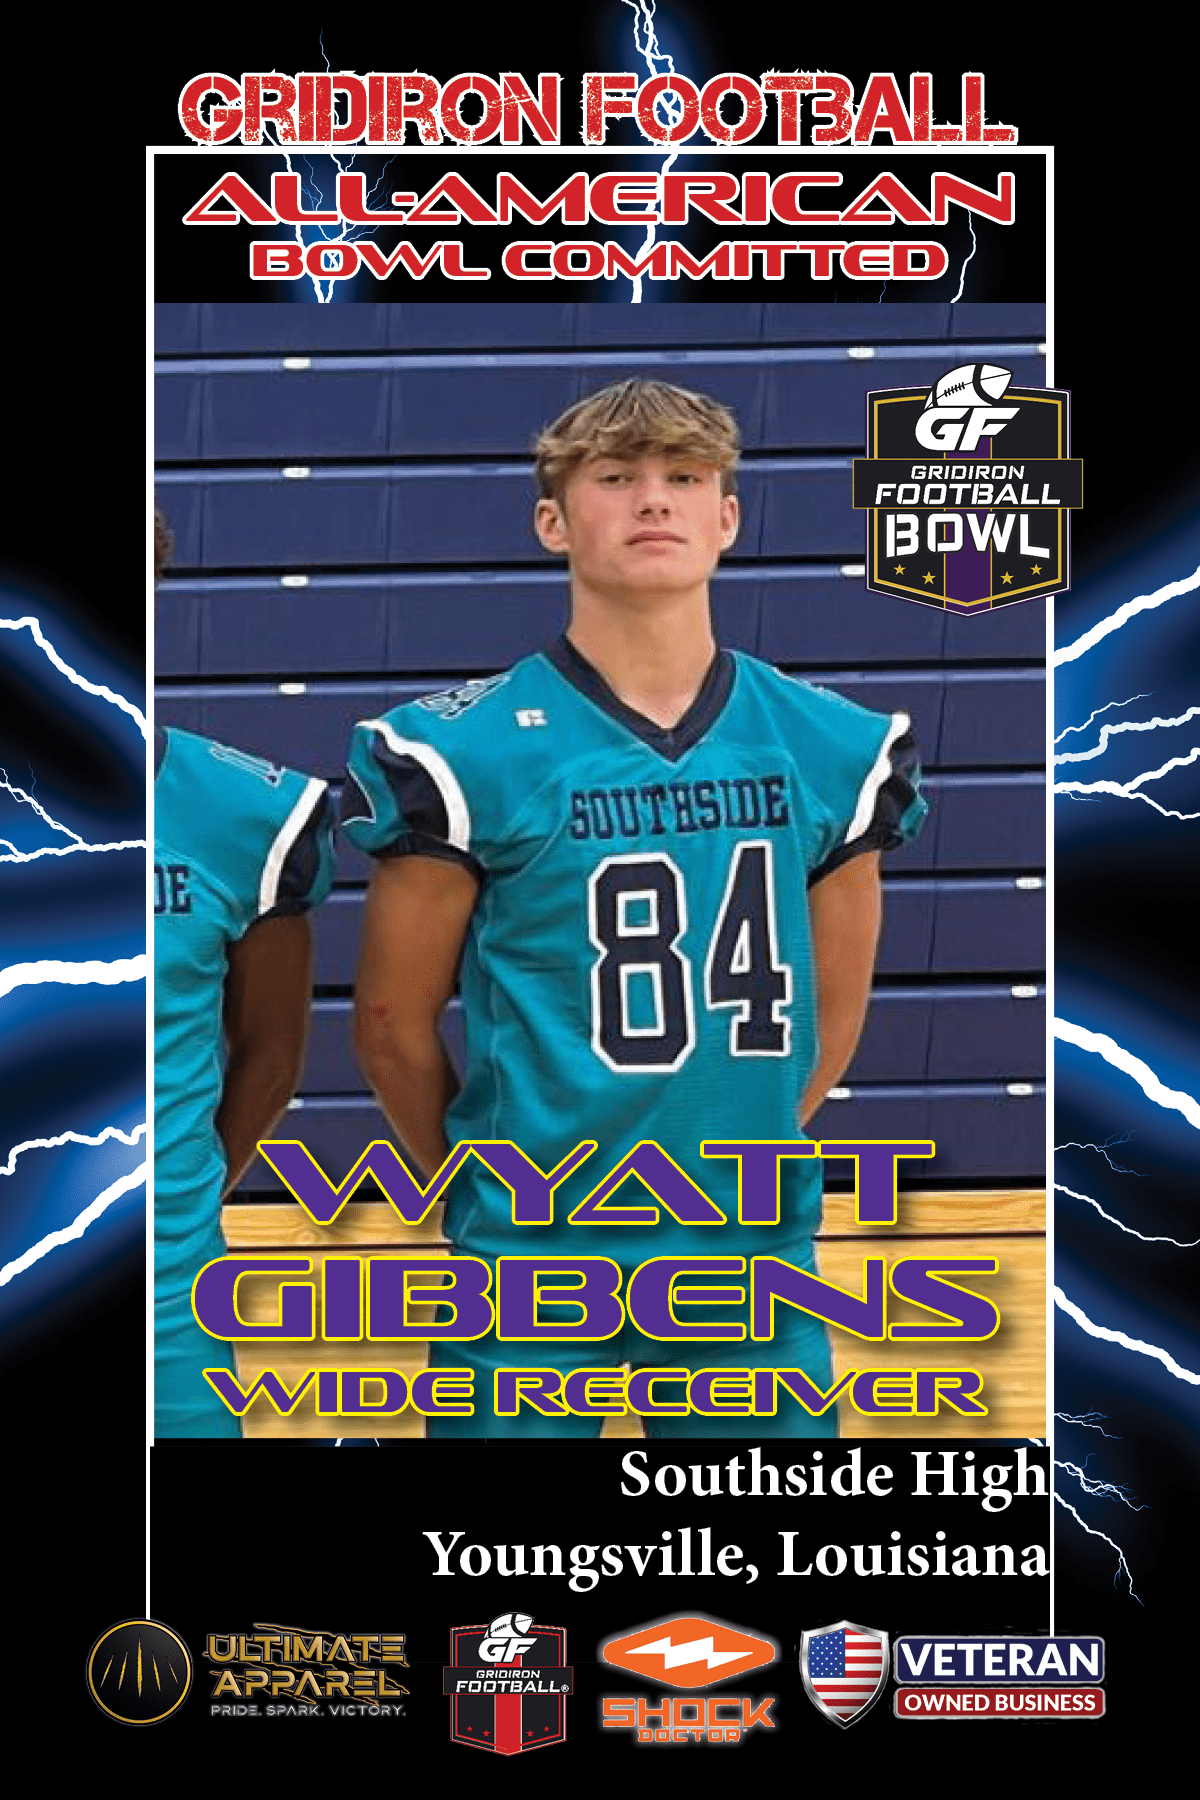 BREAKING NEWS: Southside High School (Youngsville, LA) WR Wyatt Gibbens Commits To The Gridiron Football All-American Bowl Game